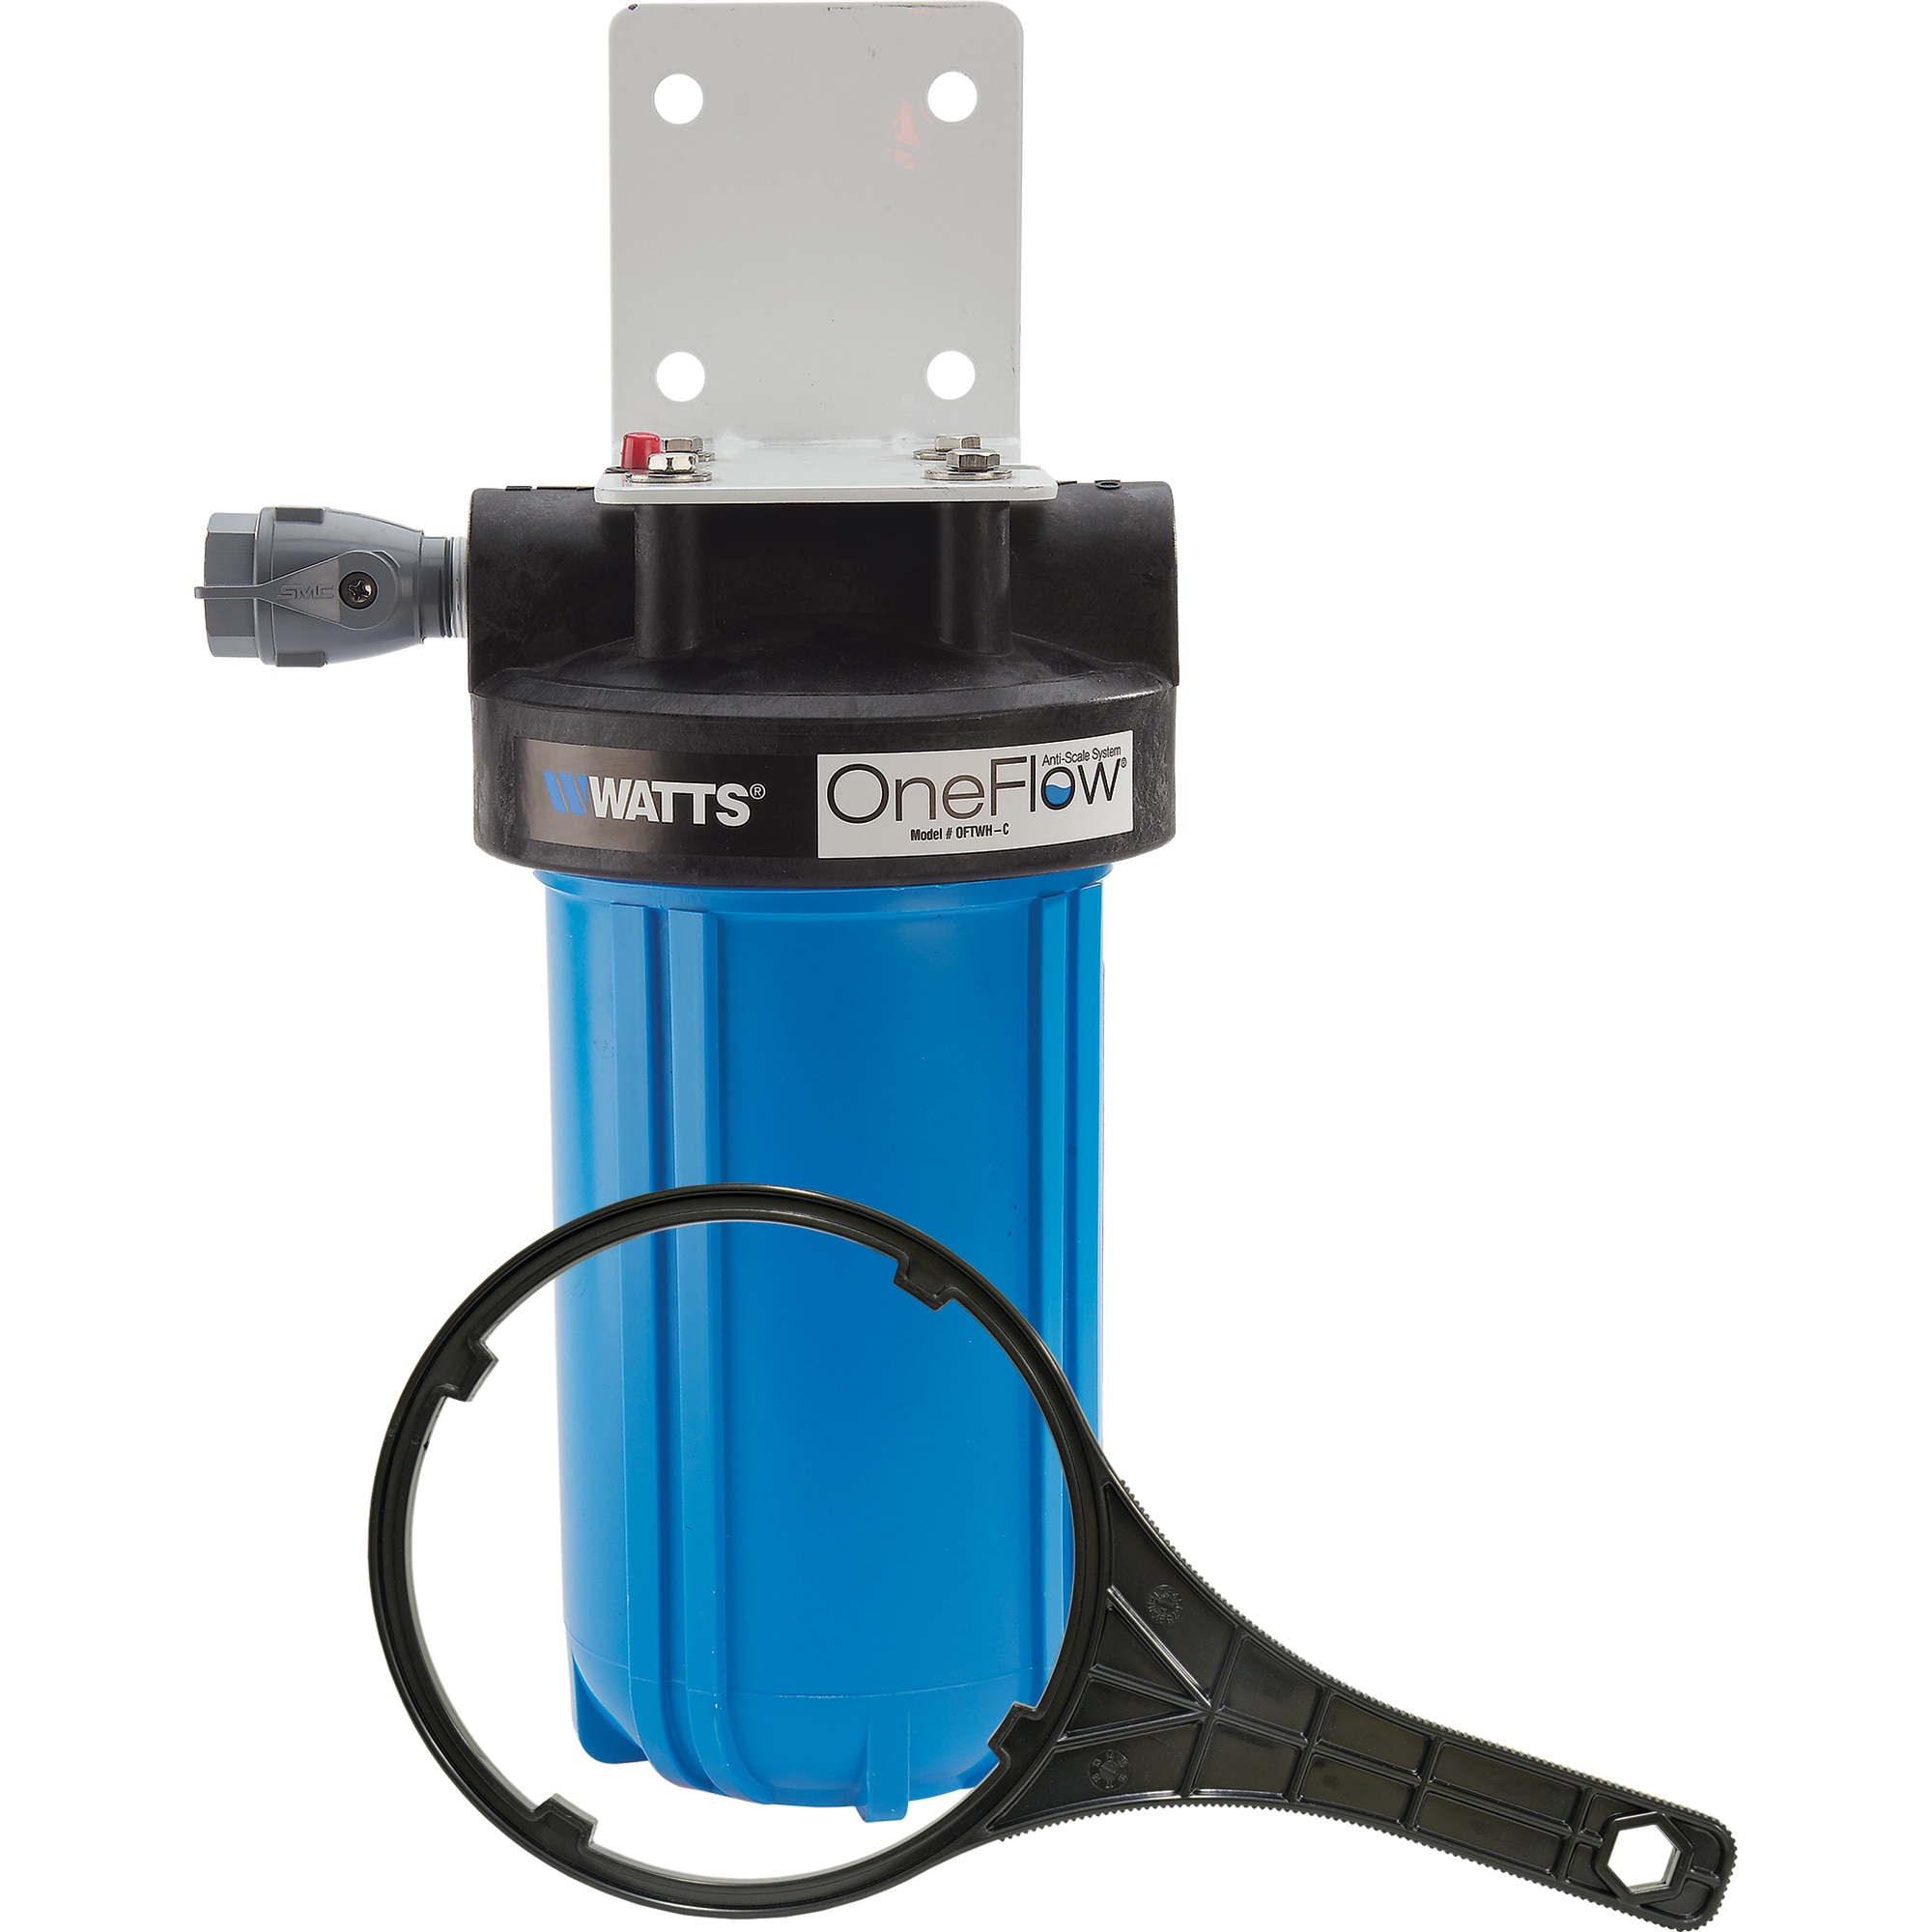 Watts OneFlow Anti-Scale Water Softener System at Lowes.com